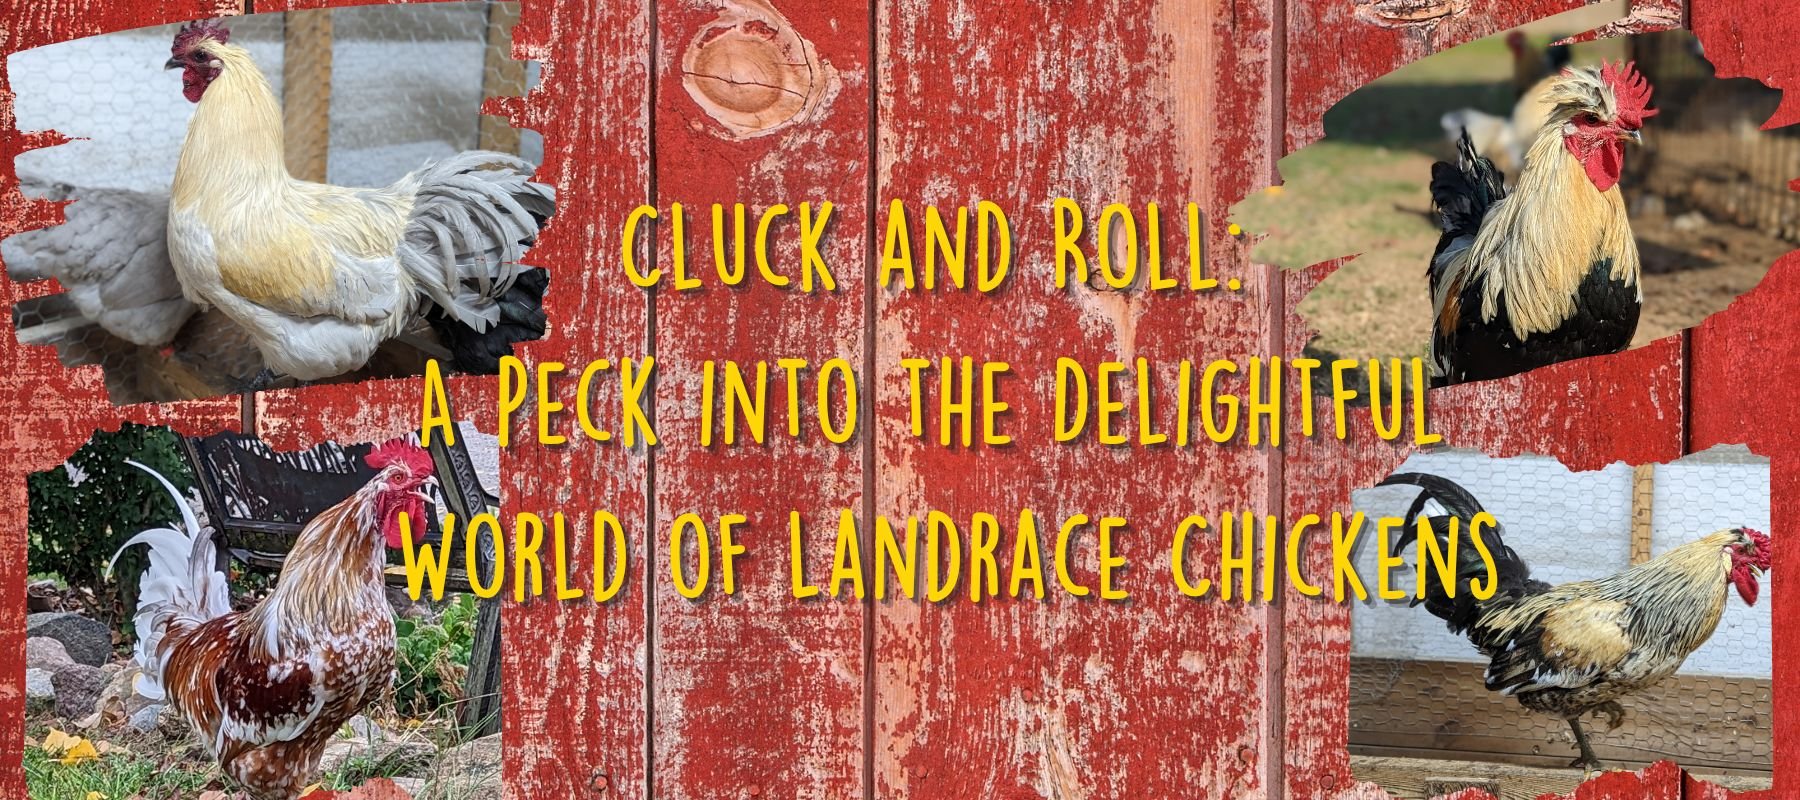 Cluck and Roll: A Peck into the Delightful World of Landrace Chickens - Cluck It All Farms